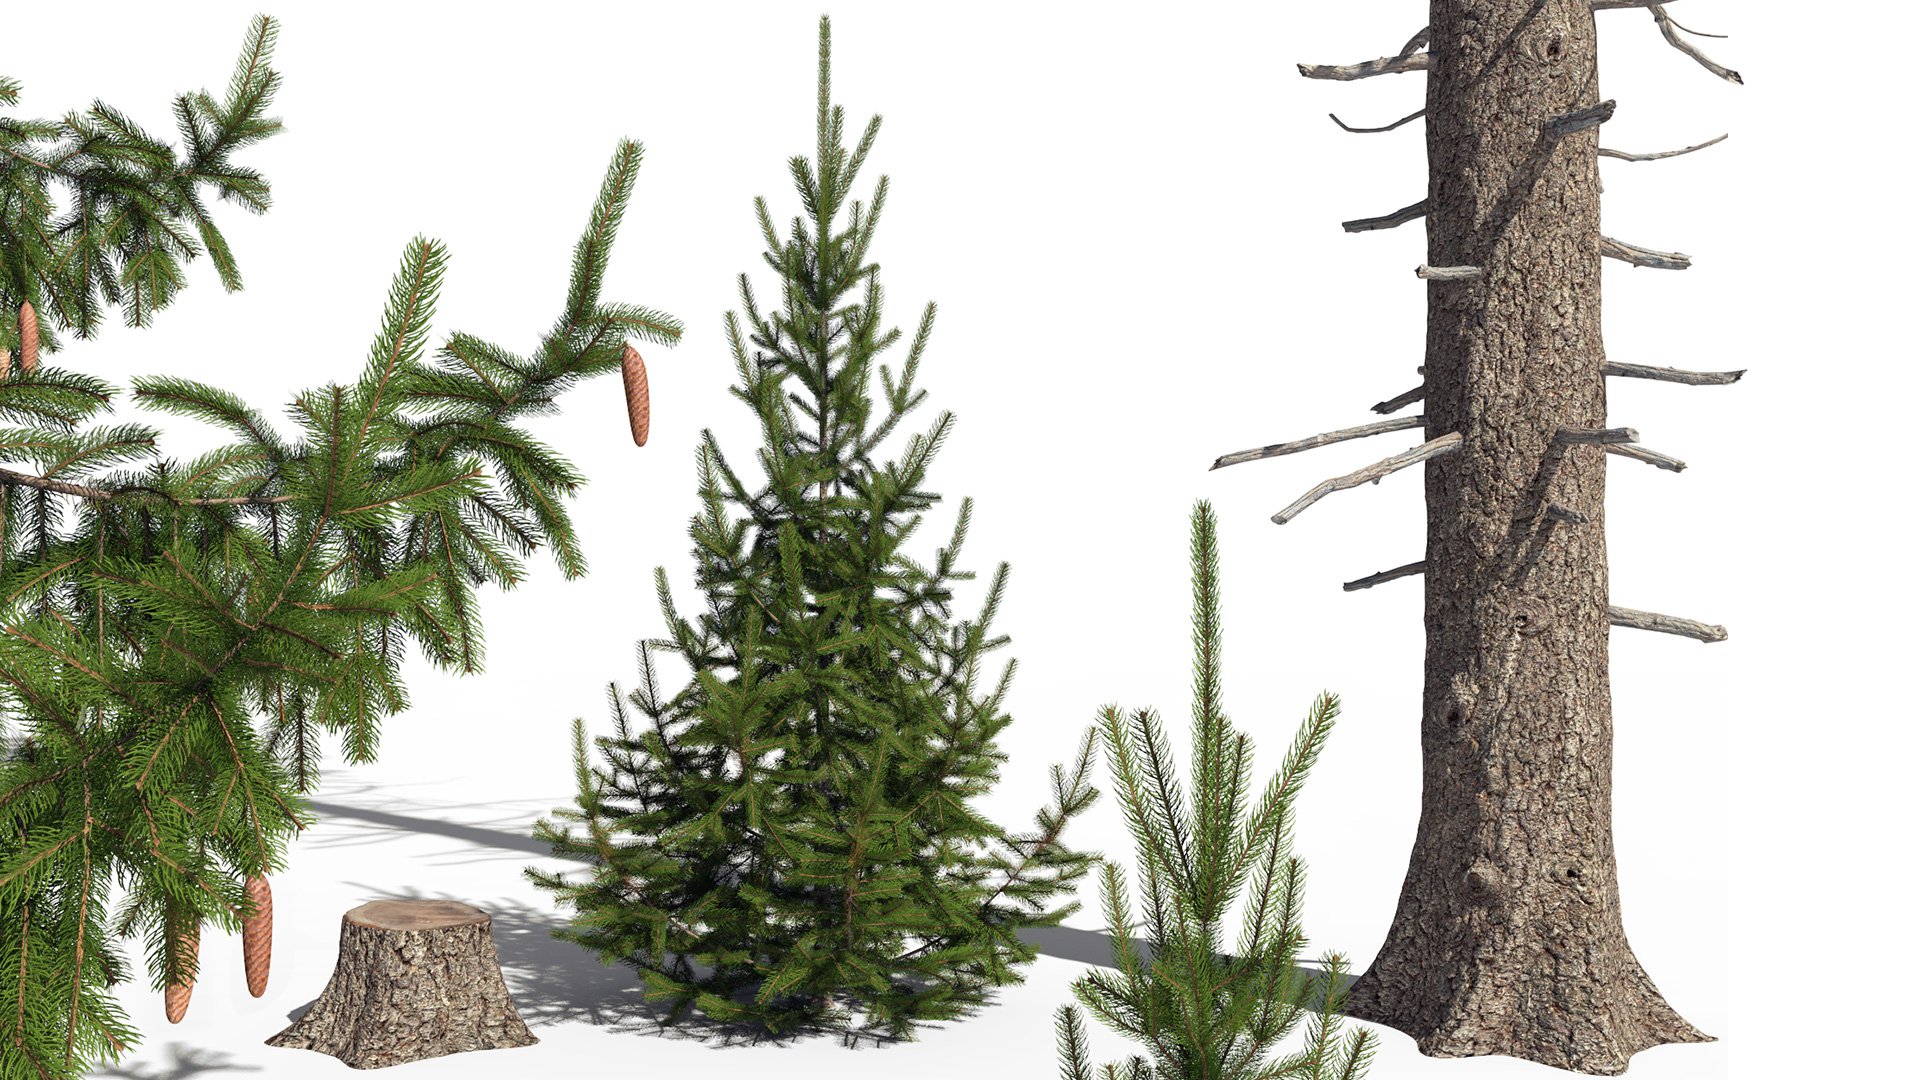 3D model of the Norway spruce Picea abies